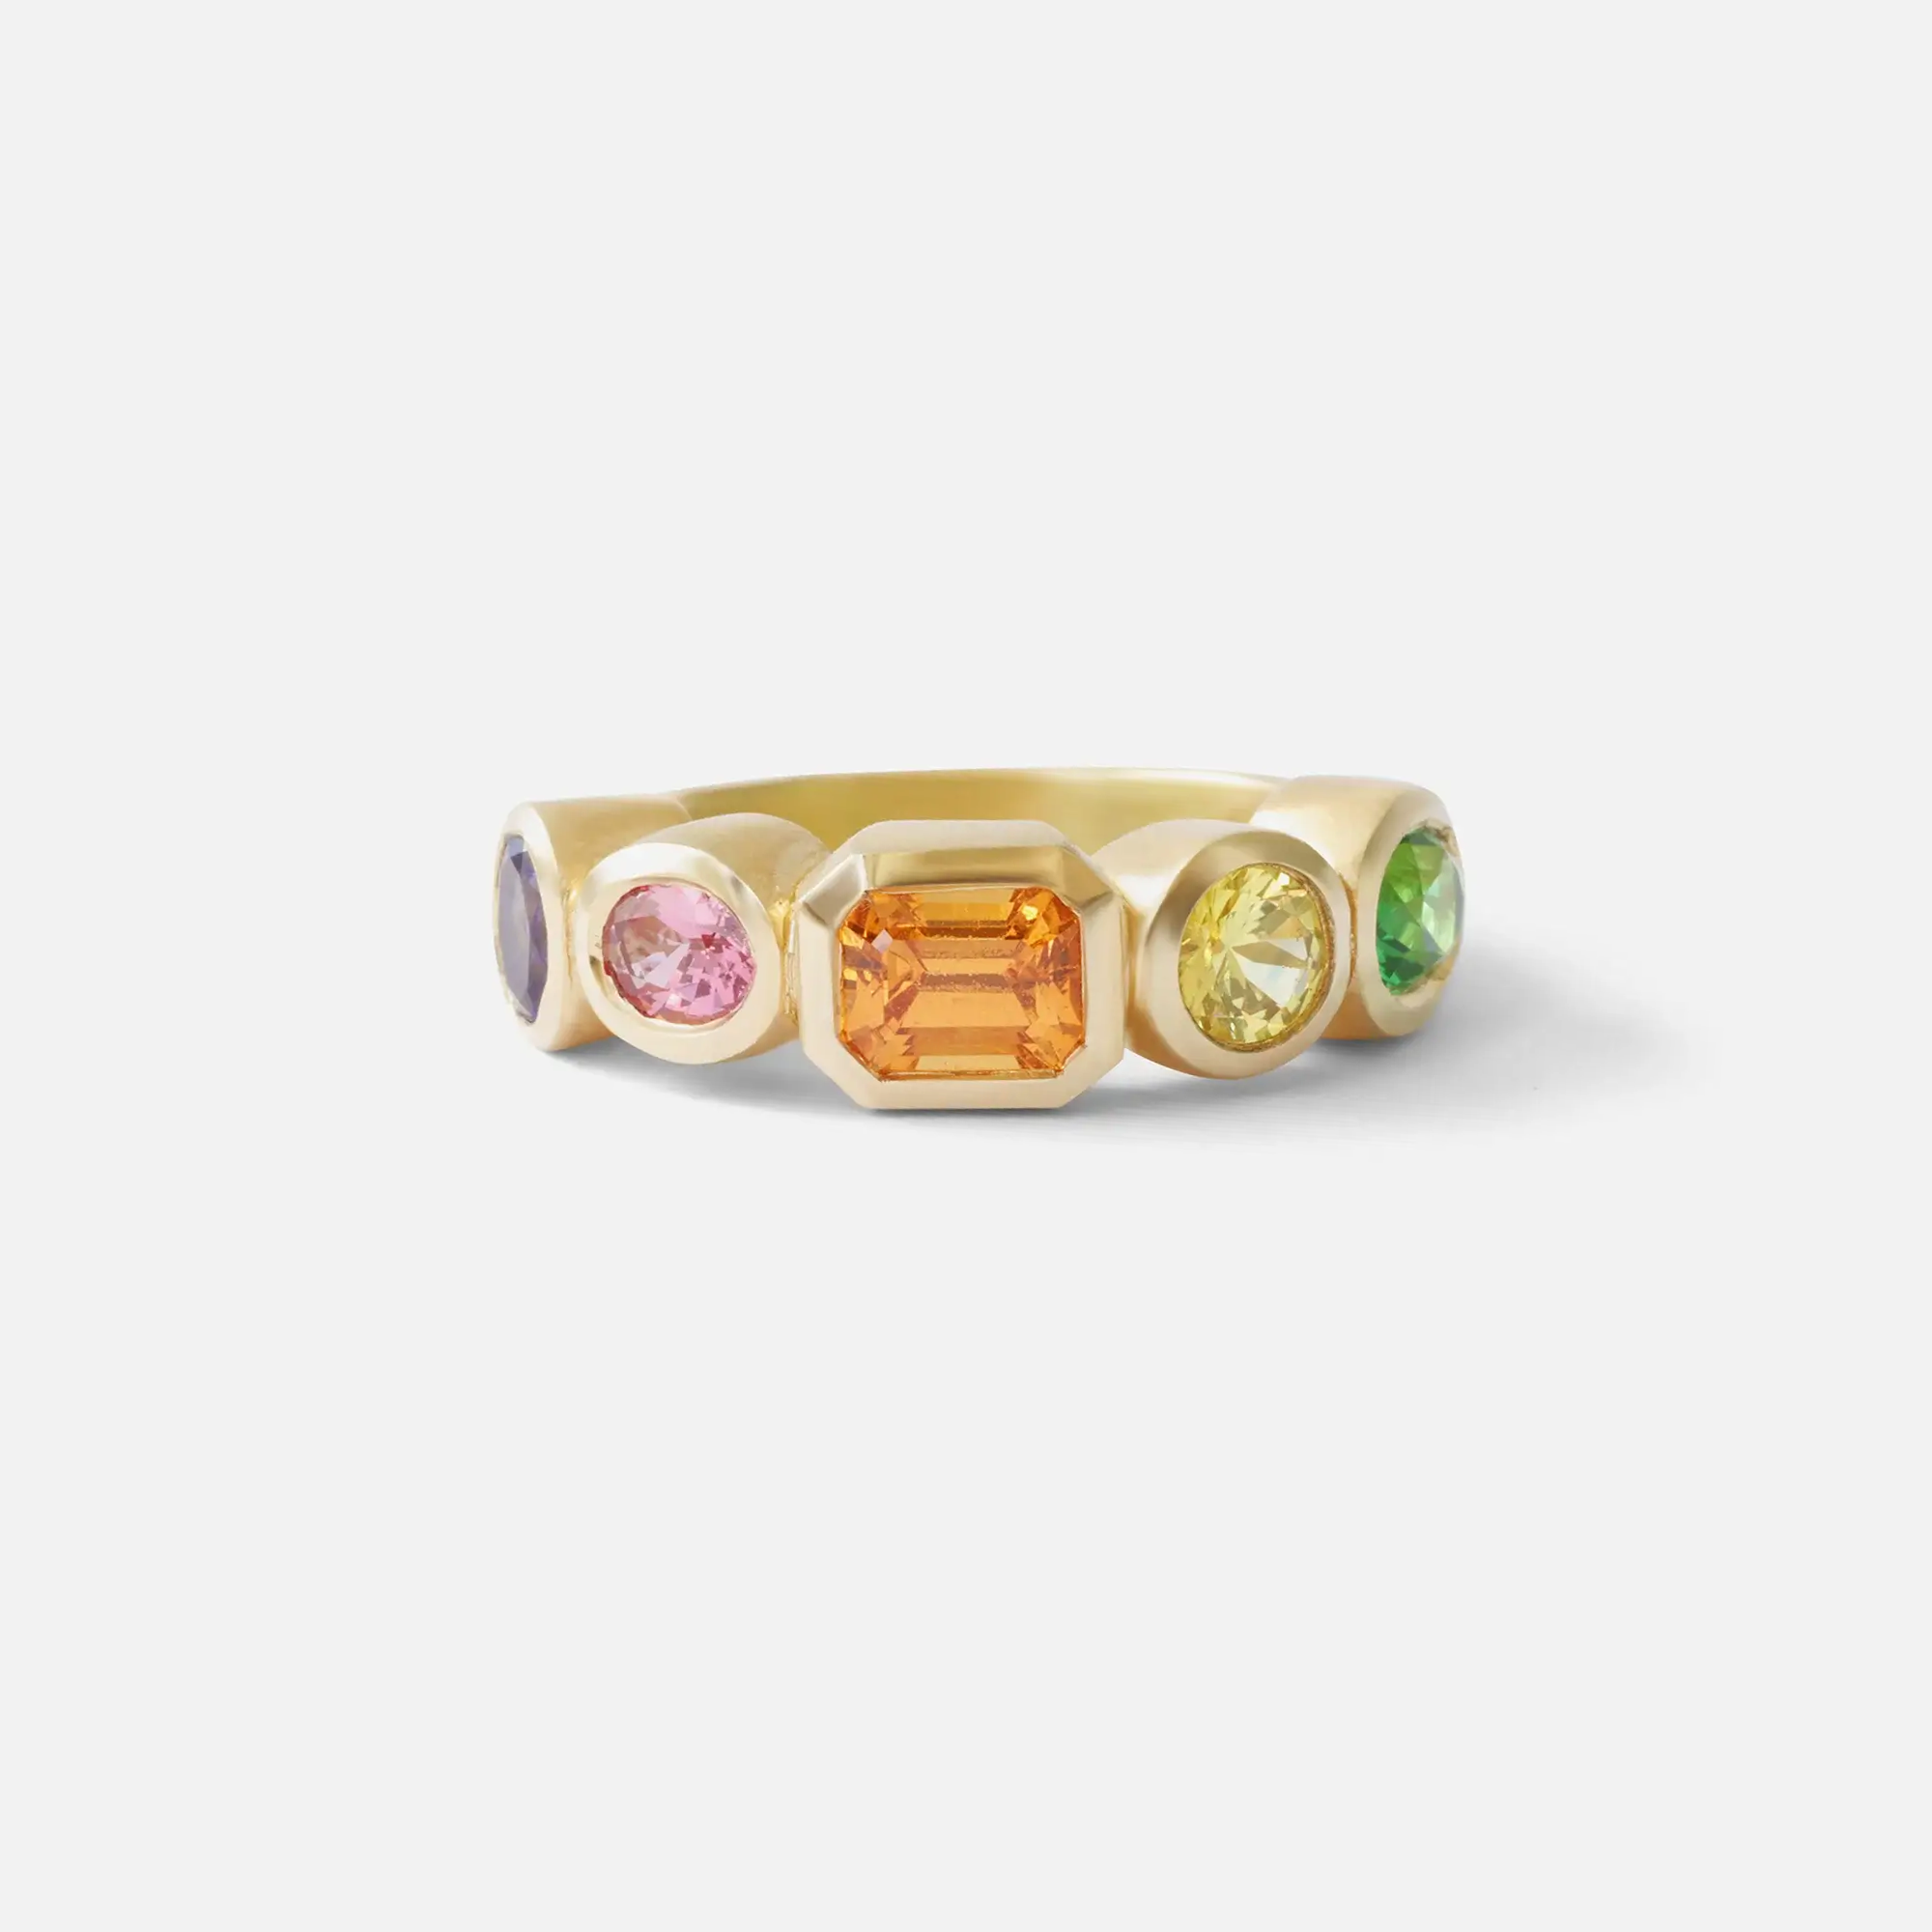 5 Stone Candy Ring By Bree Altman in WEDDING Category